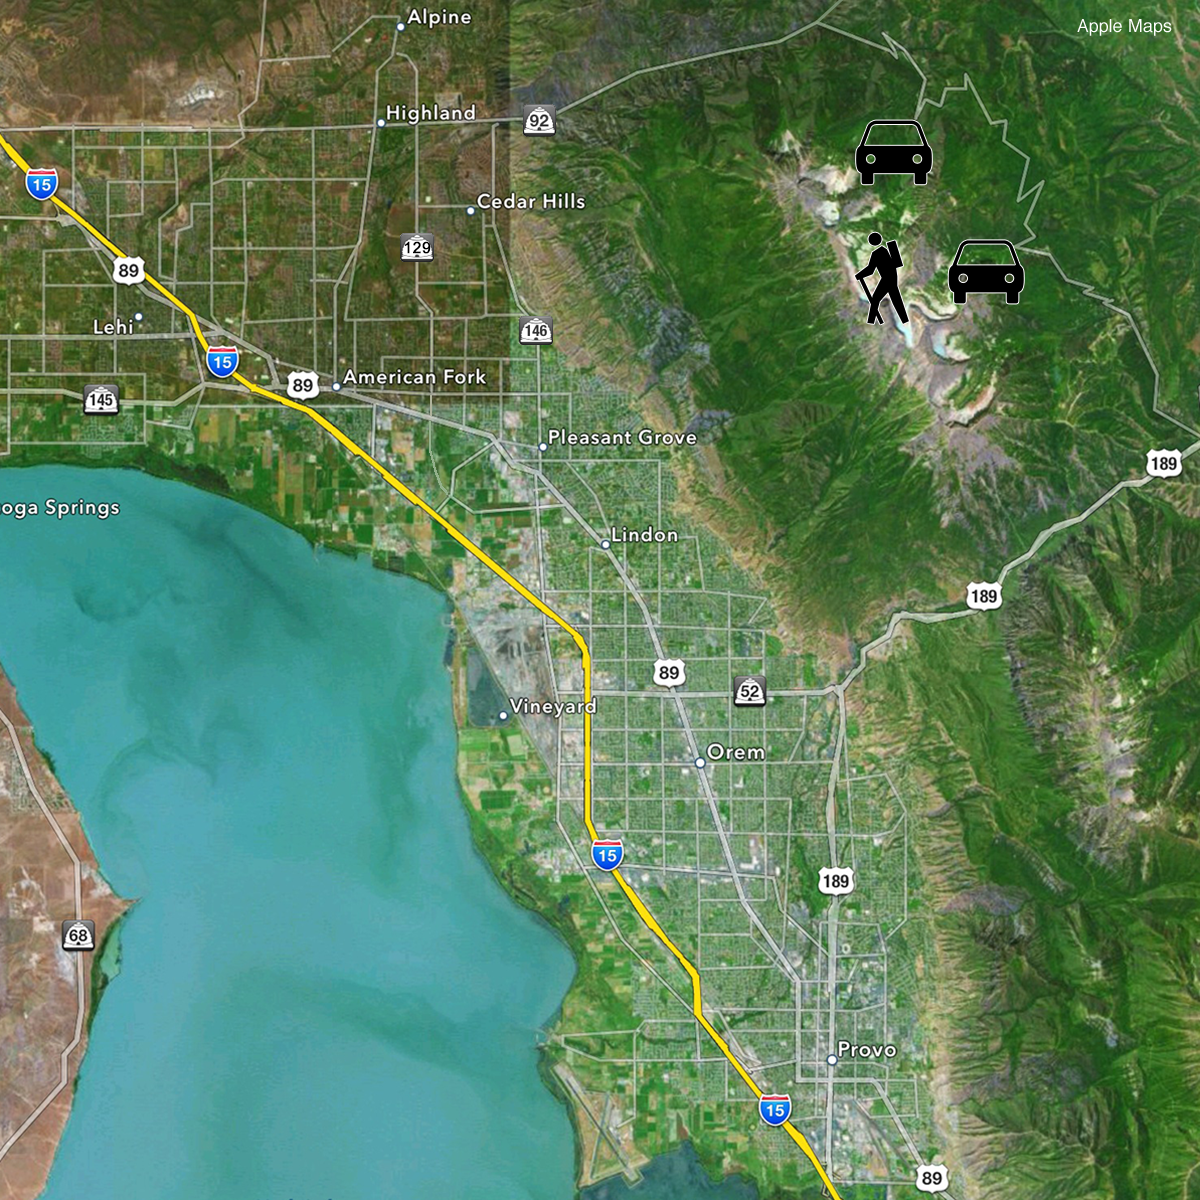 Map of roads to Timp from Apple Maps